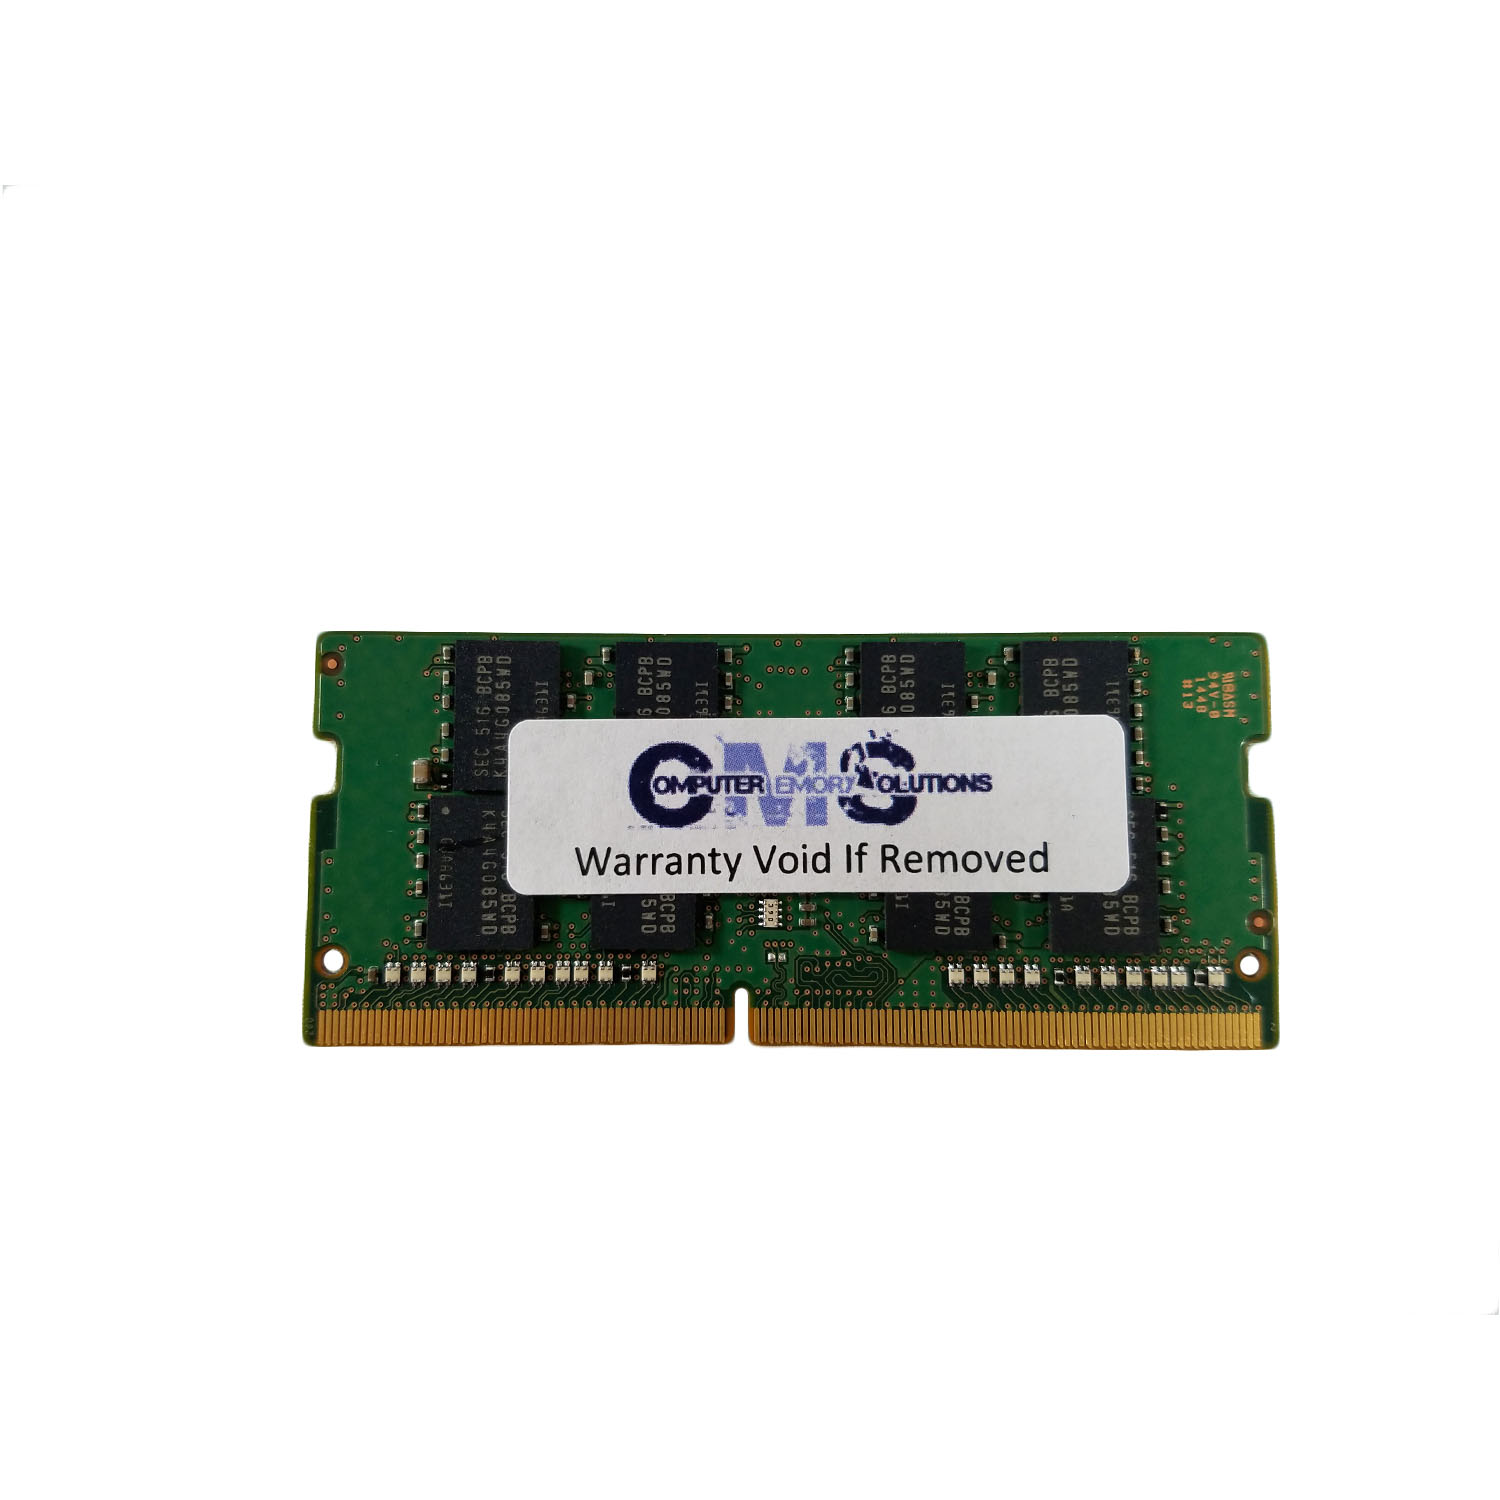 CMS 4GB (1X4GB) DDR4 17000 2133MHz NON ECC SODIMM Memory Ram Compatible with Dell Inspiron 13 5000 (5378) - A17 - image 1 of 3